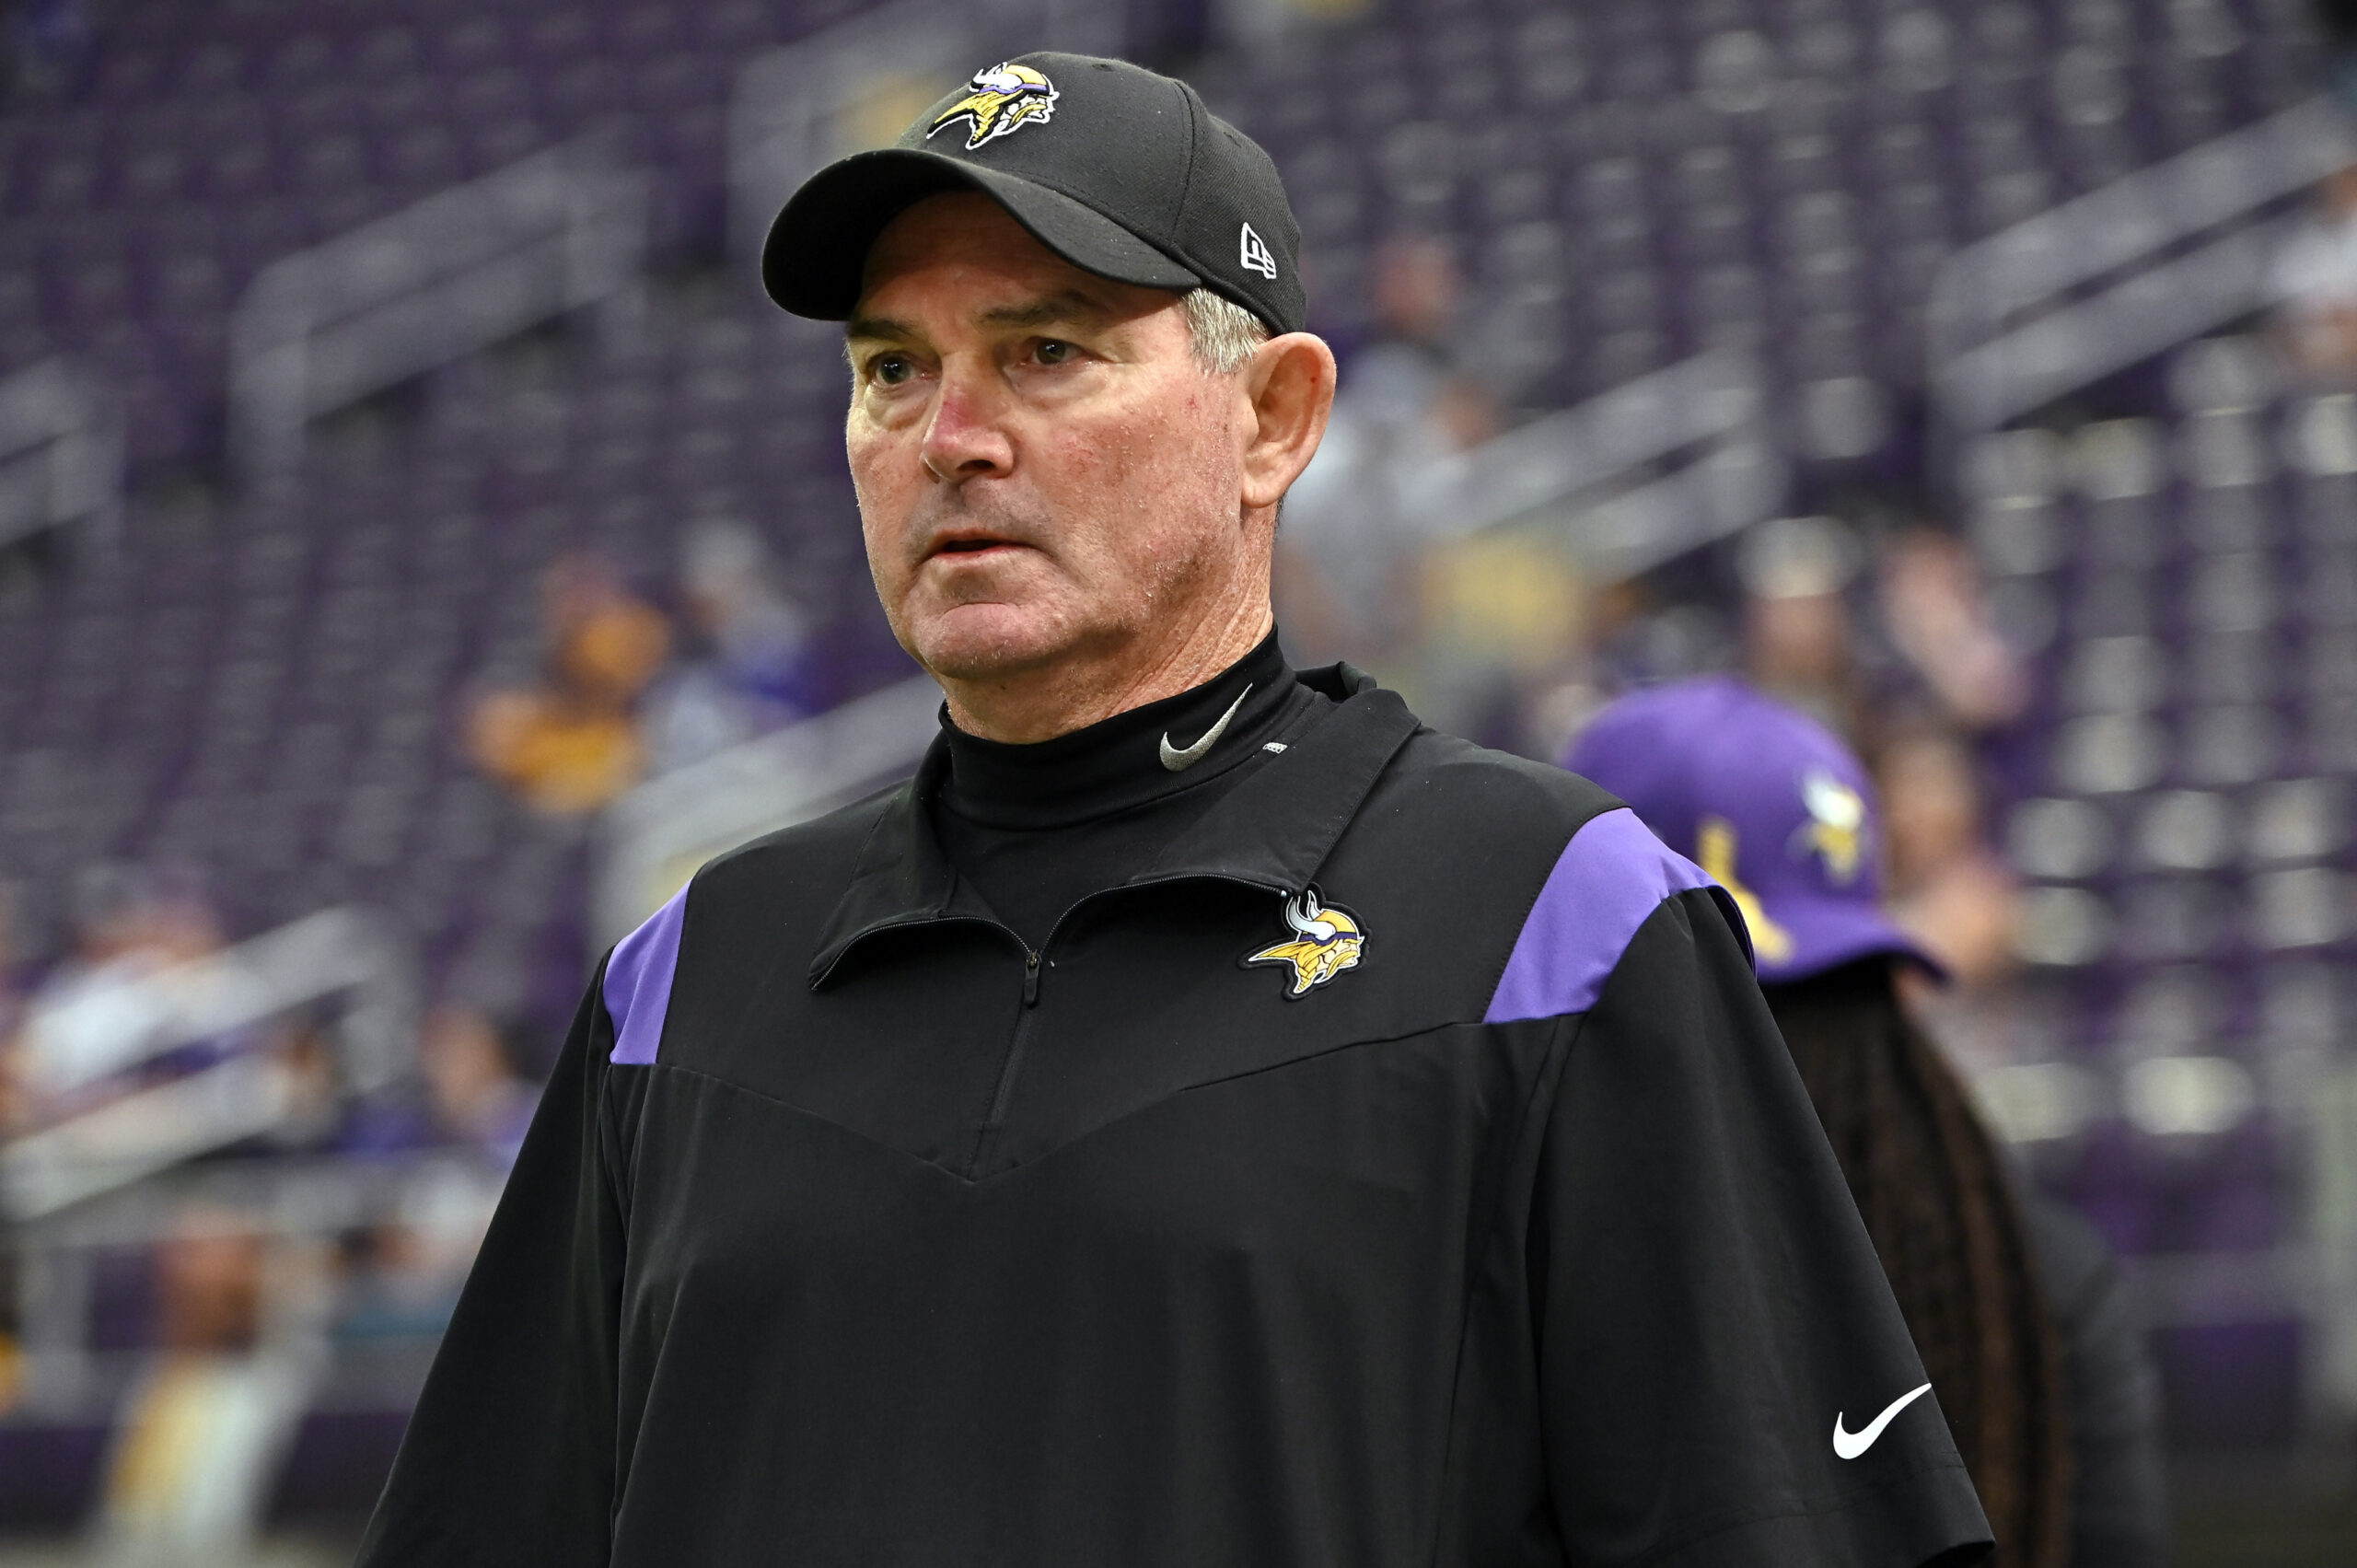 MINNEAPOLIS, MINNESOTA - OCTOBER 03: Head coach Mike Zimmer of the Minnesota Vikings takes the field before the game against the Cleveland Browns at U.S. Bank Stadium on October 03, 2021 in Minneapolis, Minnesota. (Photo by Stephen Maturen/Getty Images)